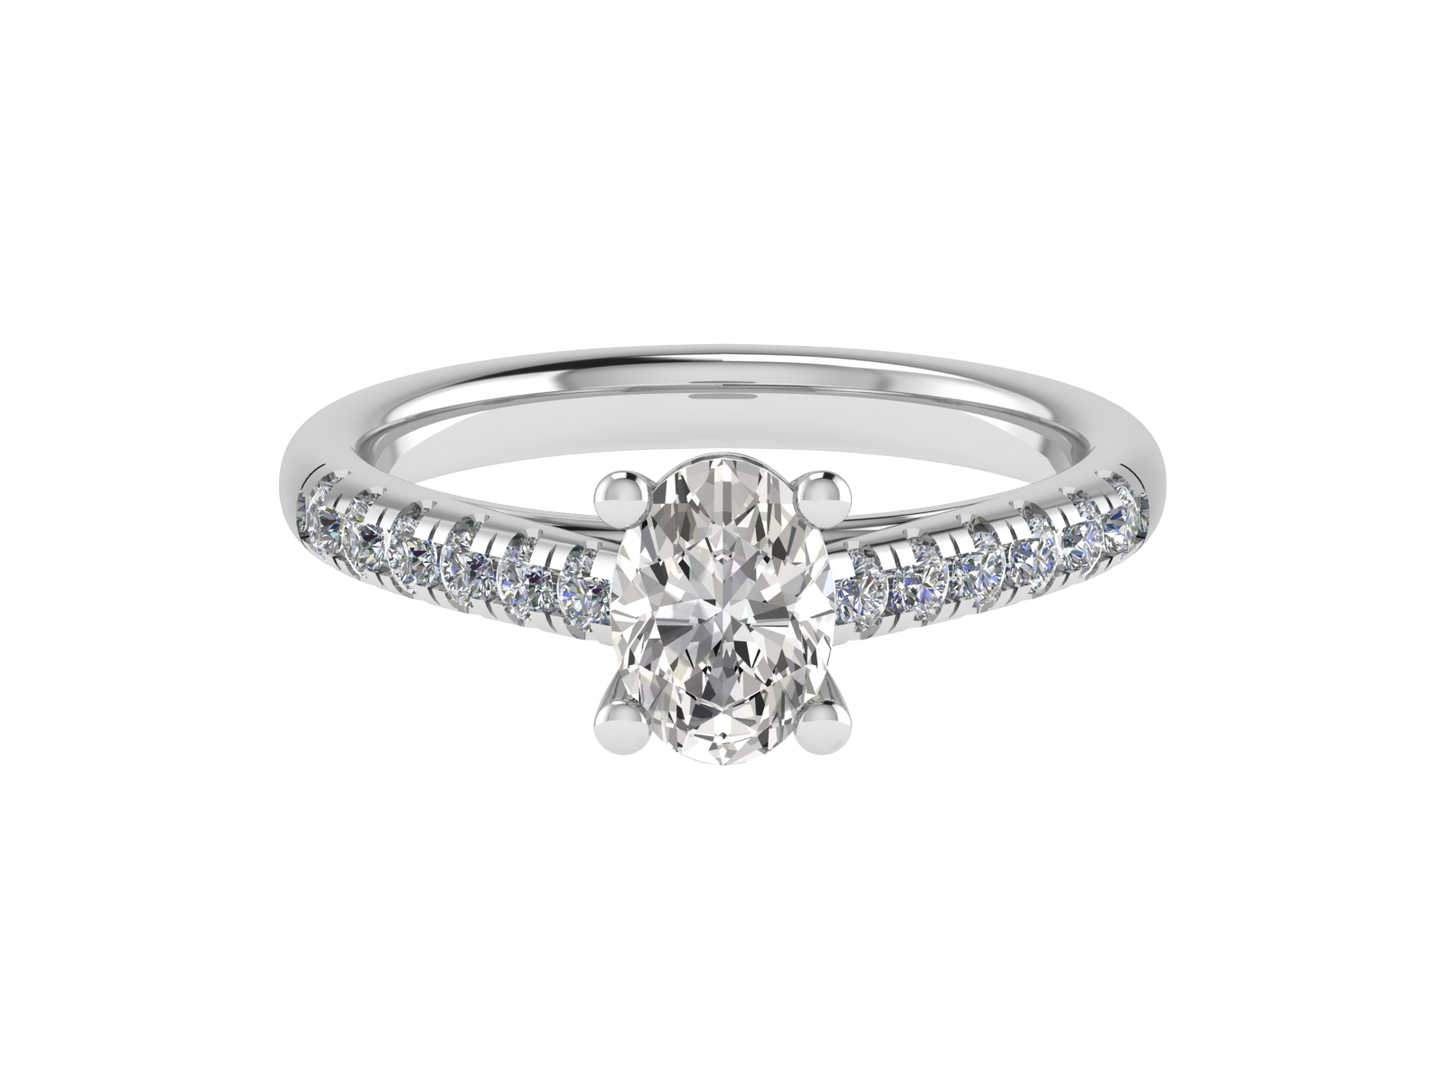 Oval Ring with Diamond set shoulders 5 x 3mm